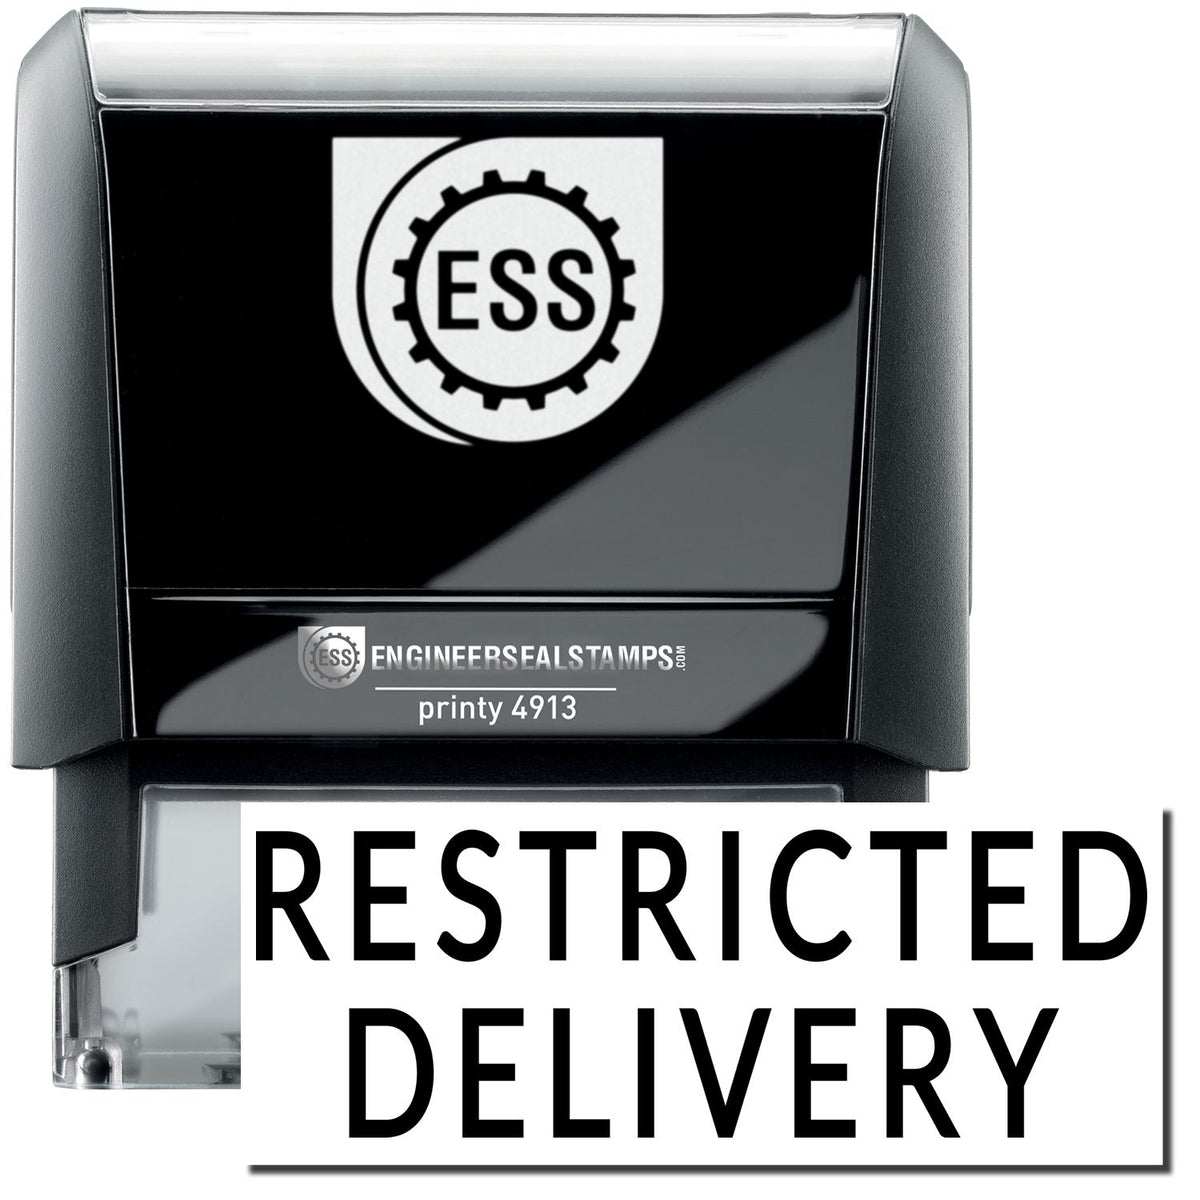 A self-inking stamp with a stamped image showing how the text &quot;RESTRICTED DELIVERY&quot; in a large font is displayed by it after stamping.